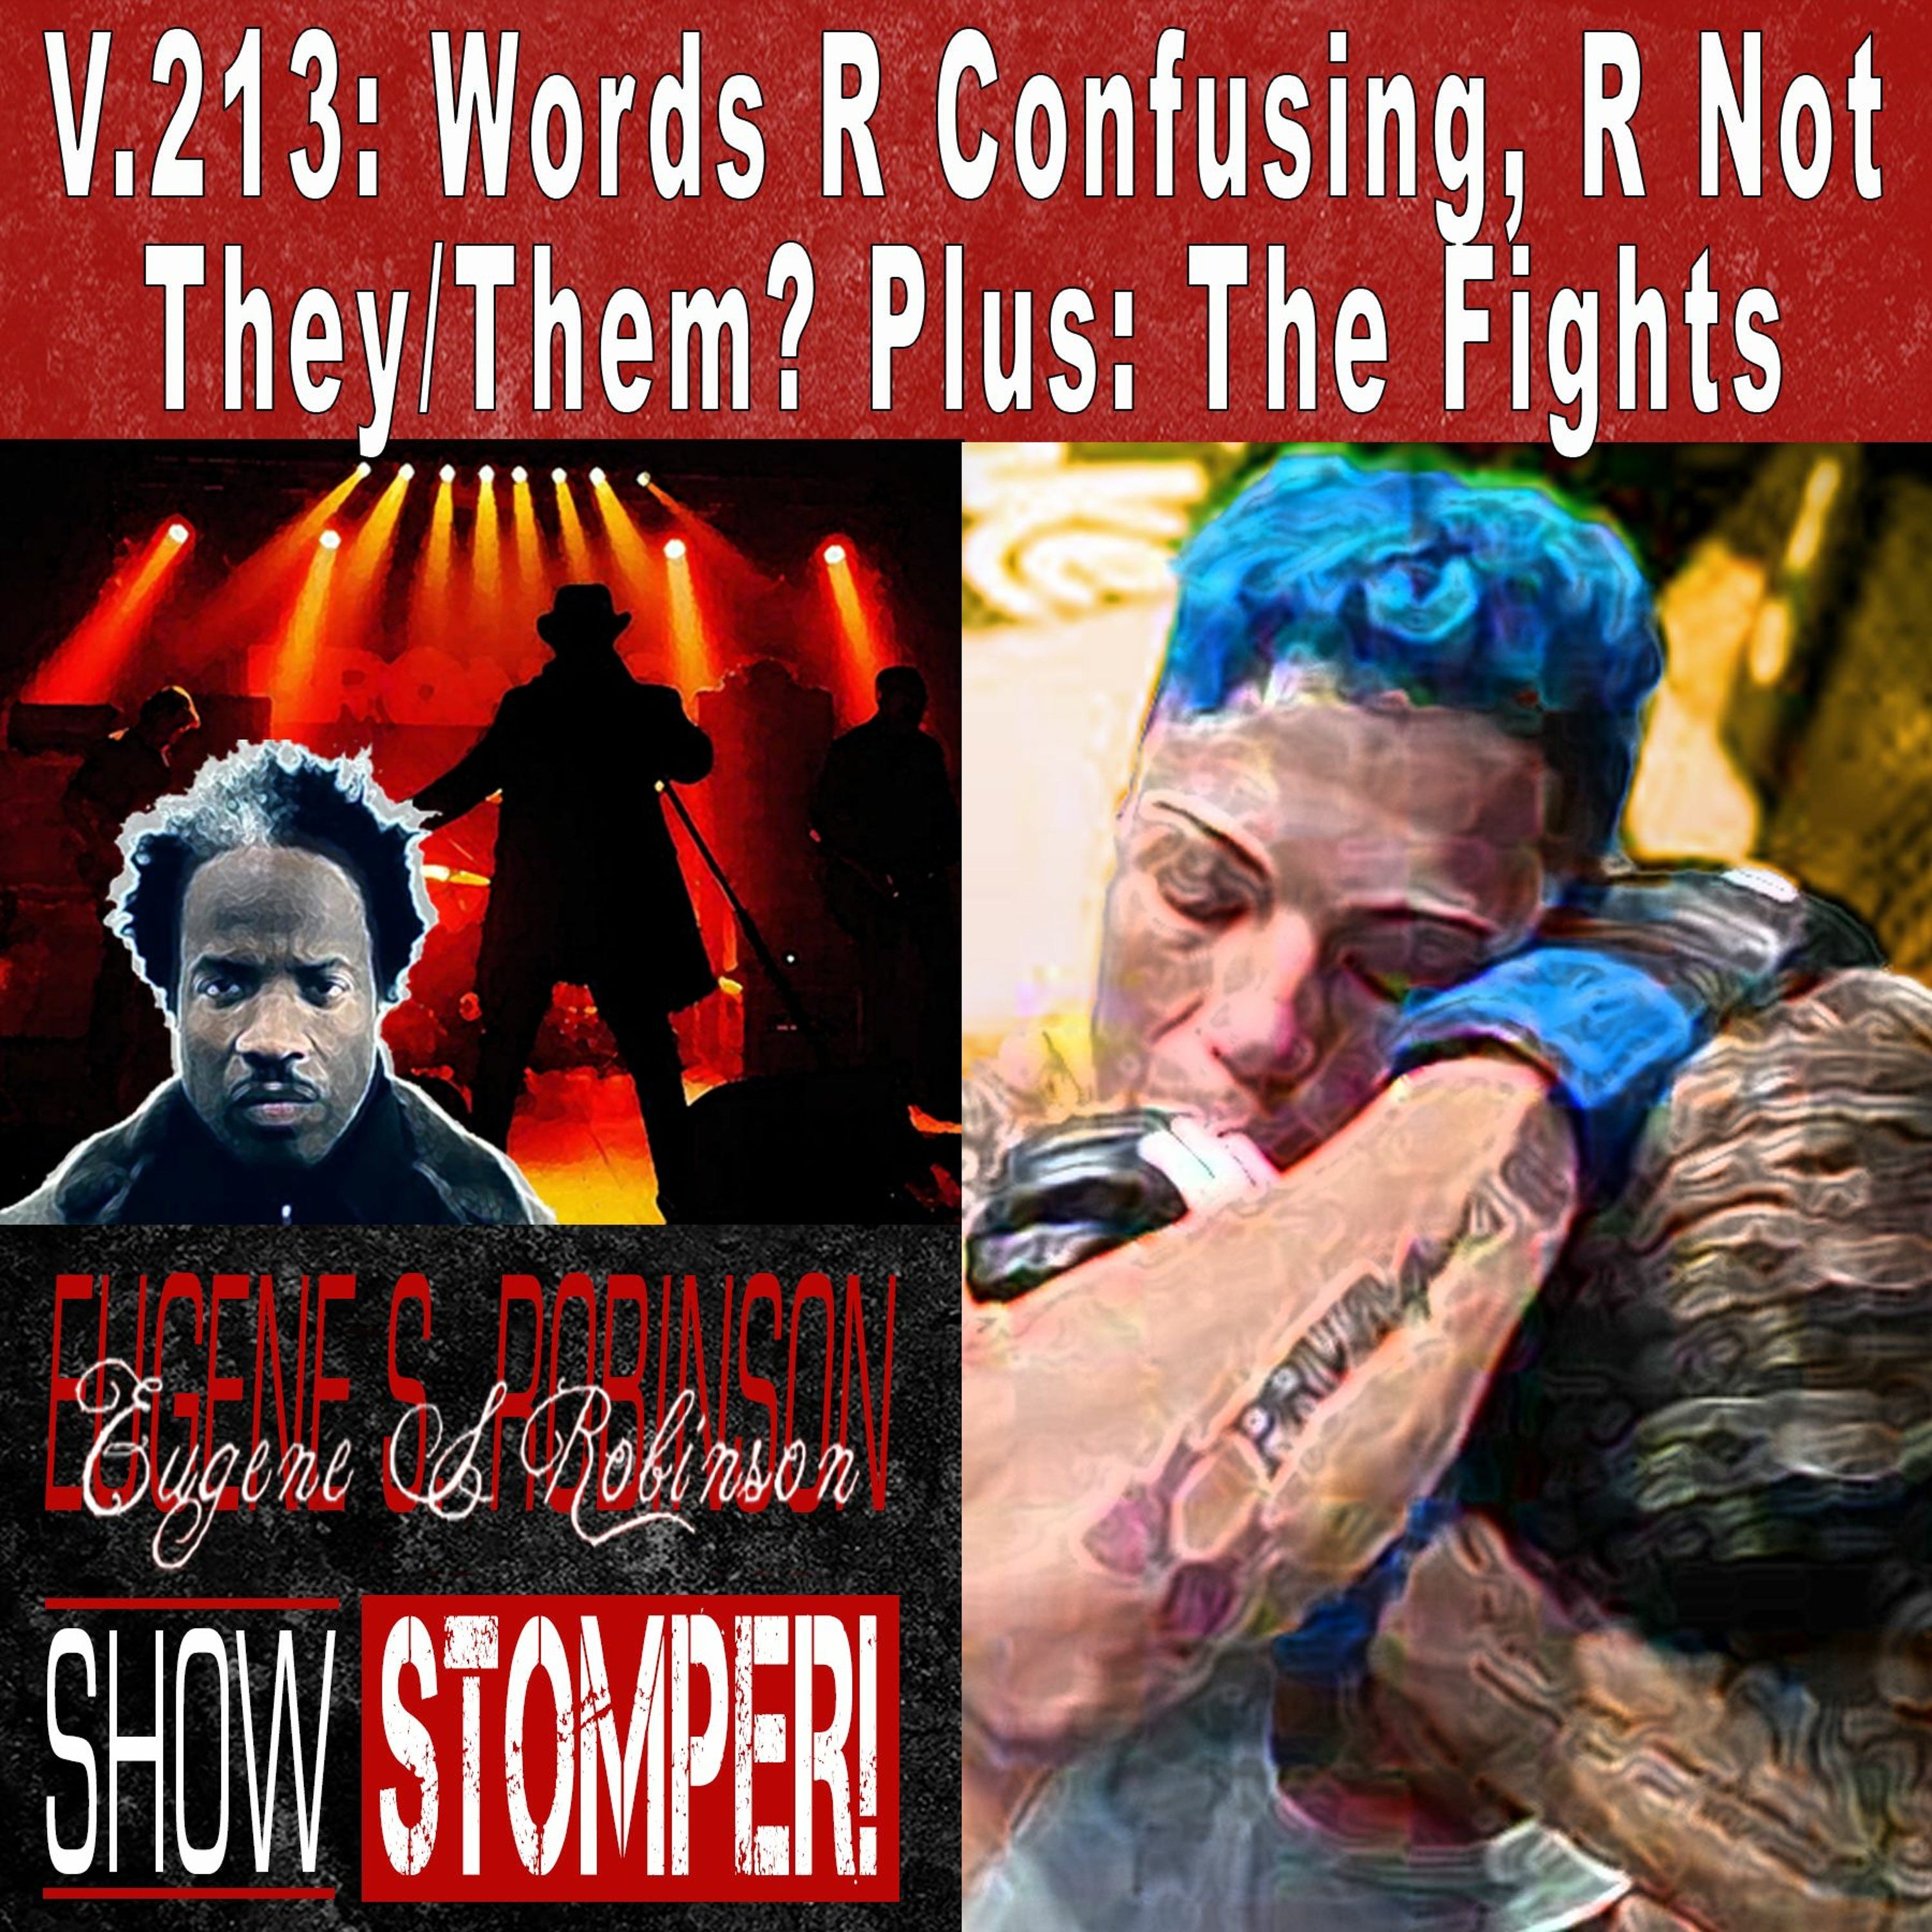 V.213: Words R Confusing, R Not They/Them? Plus: The Fights On The Eugene S. Robinson Show Stomper!